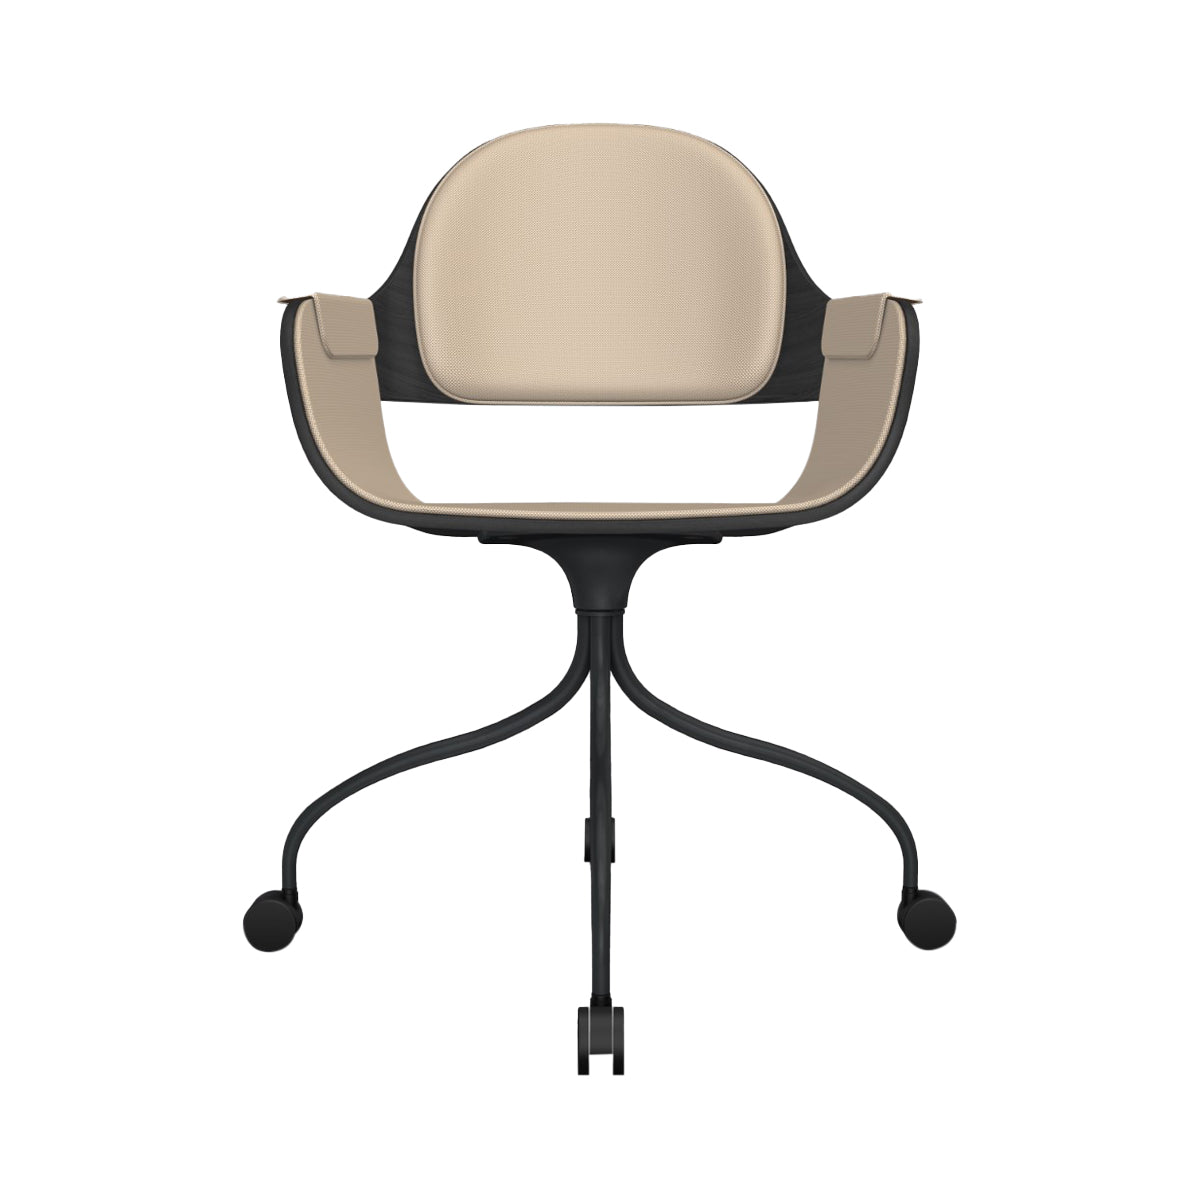 Showtime Nude Chair with Wheel: Interior Seat + Backrest Cushion + Ash Stained Black + Anthracite Grey